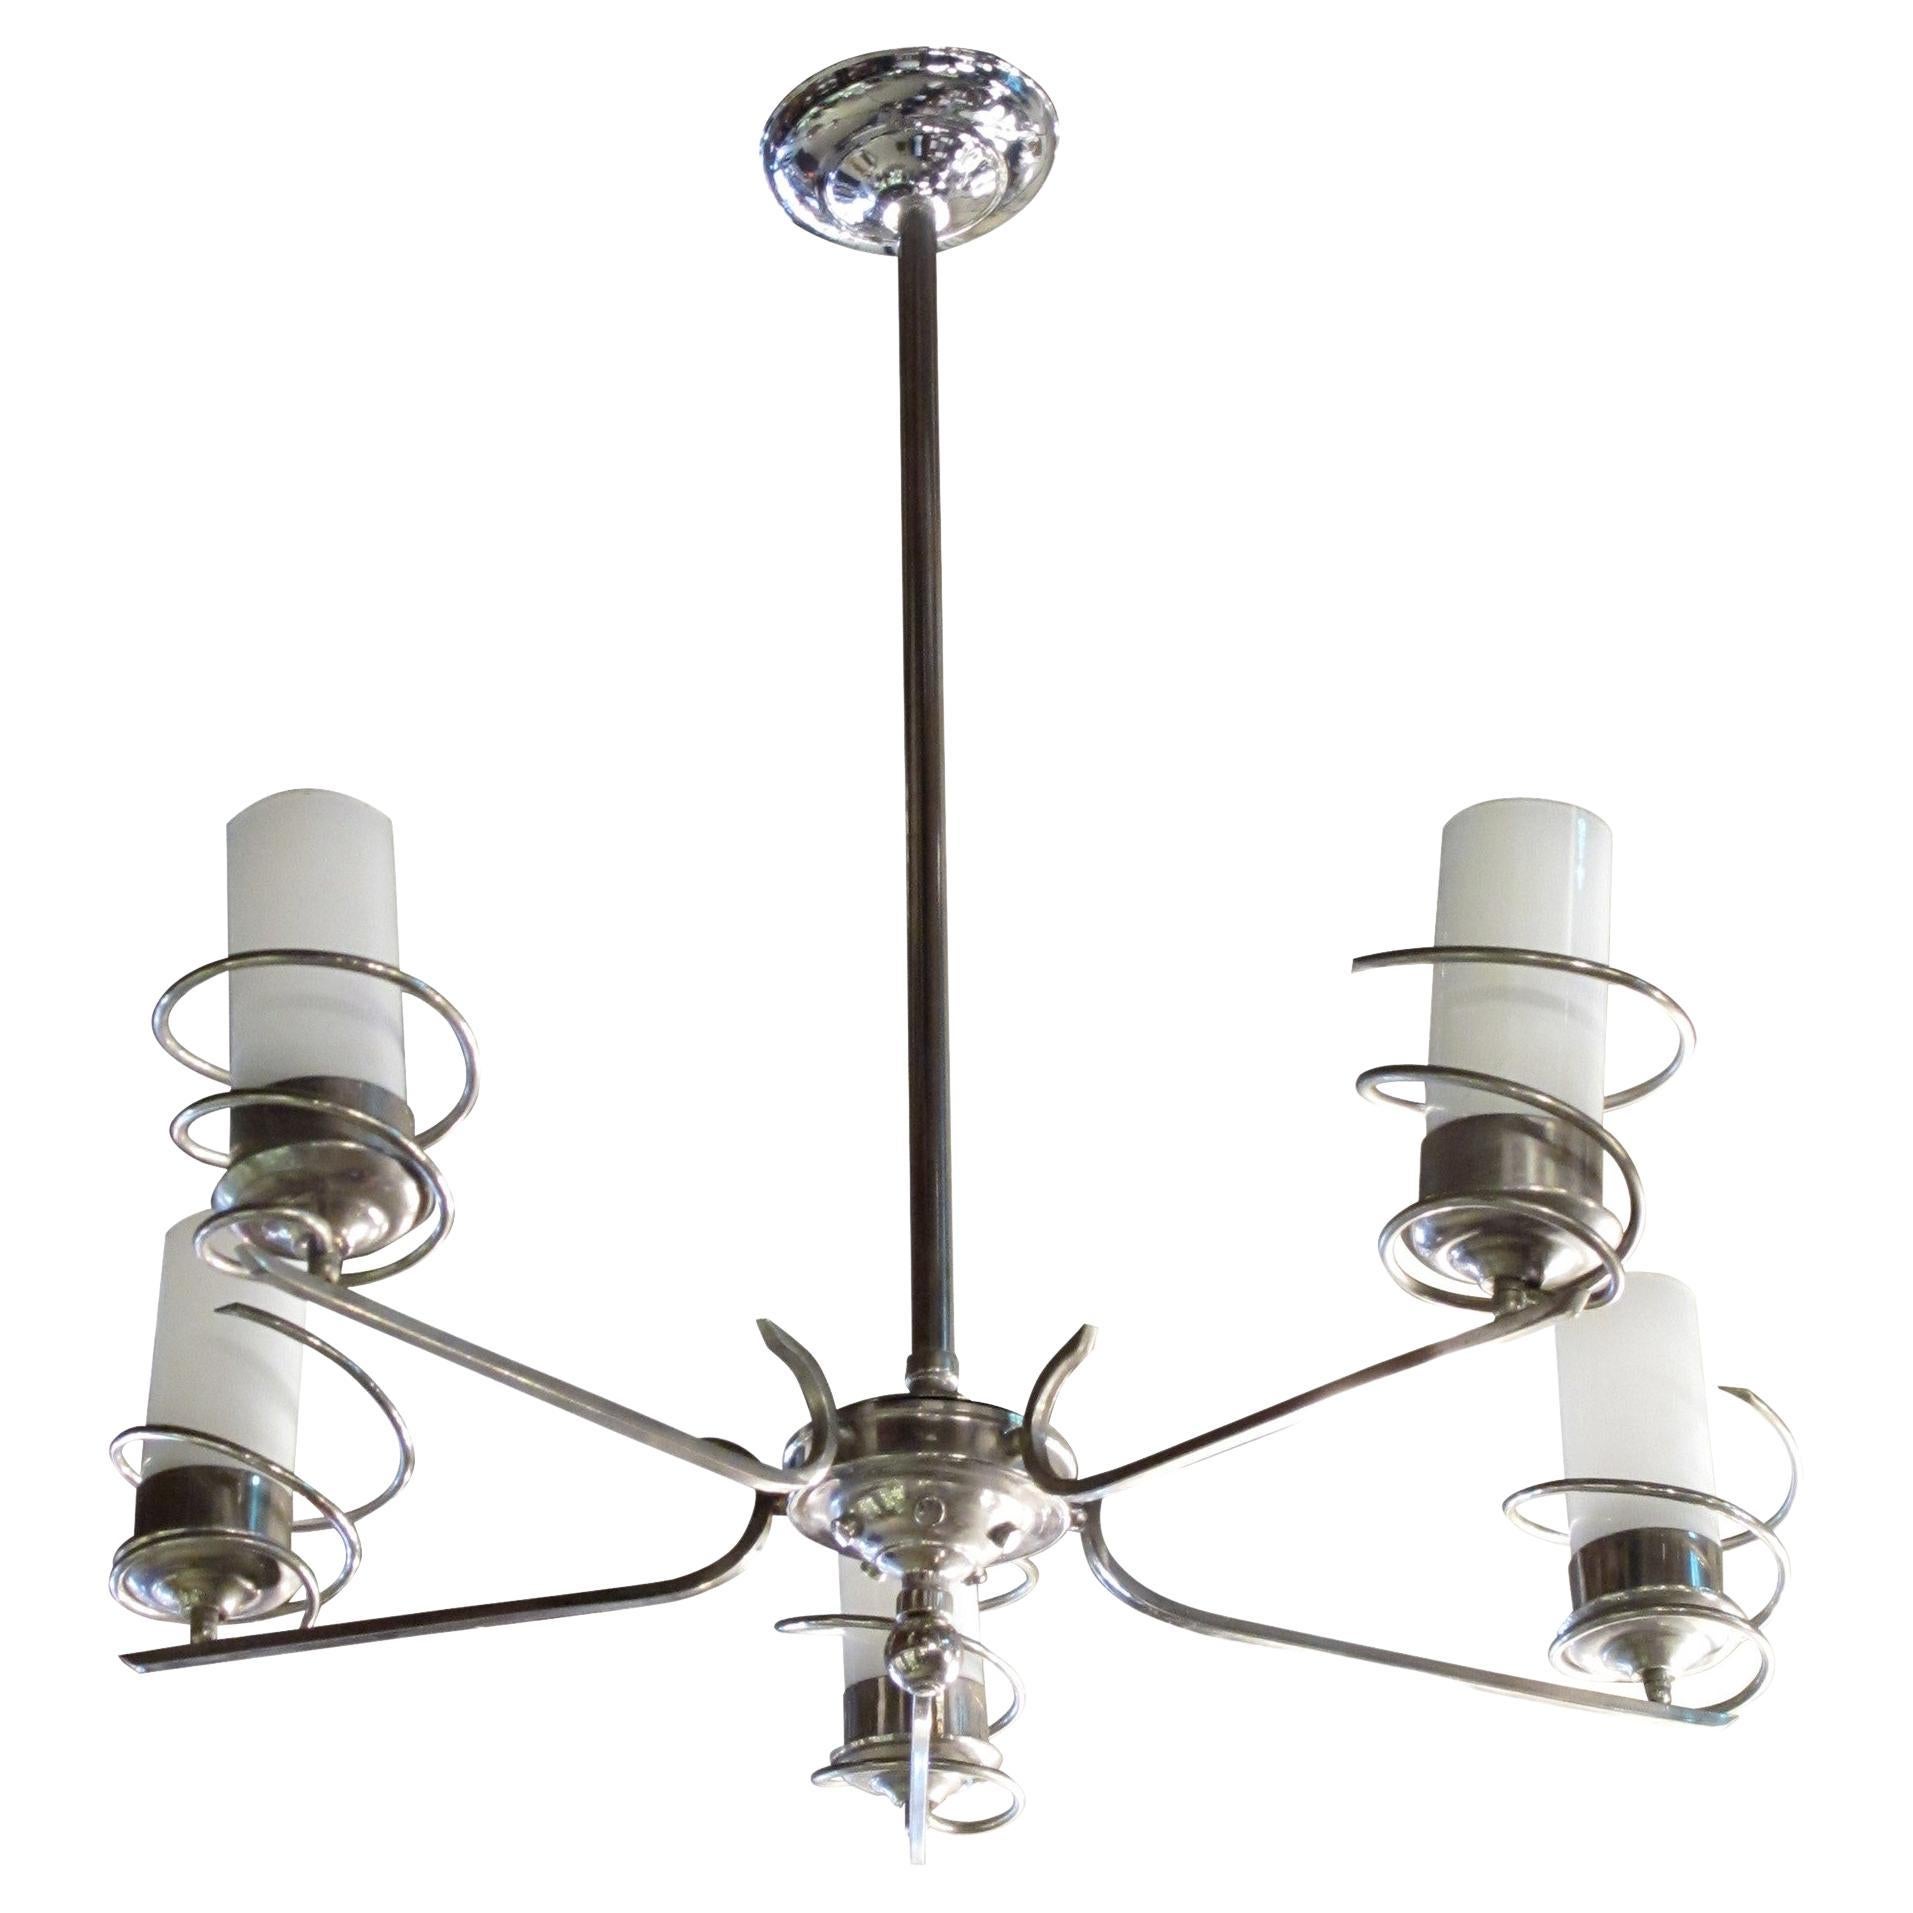 Chandelier in Opaline Glass and Chromed Bronze, Style: Art Deco, German, 1920 For Sale